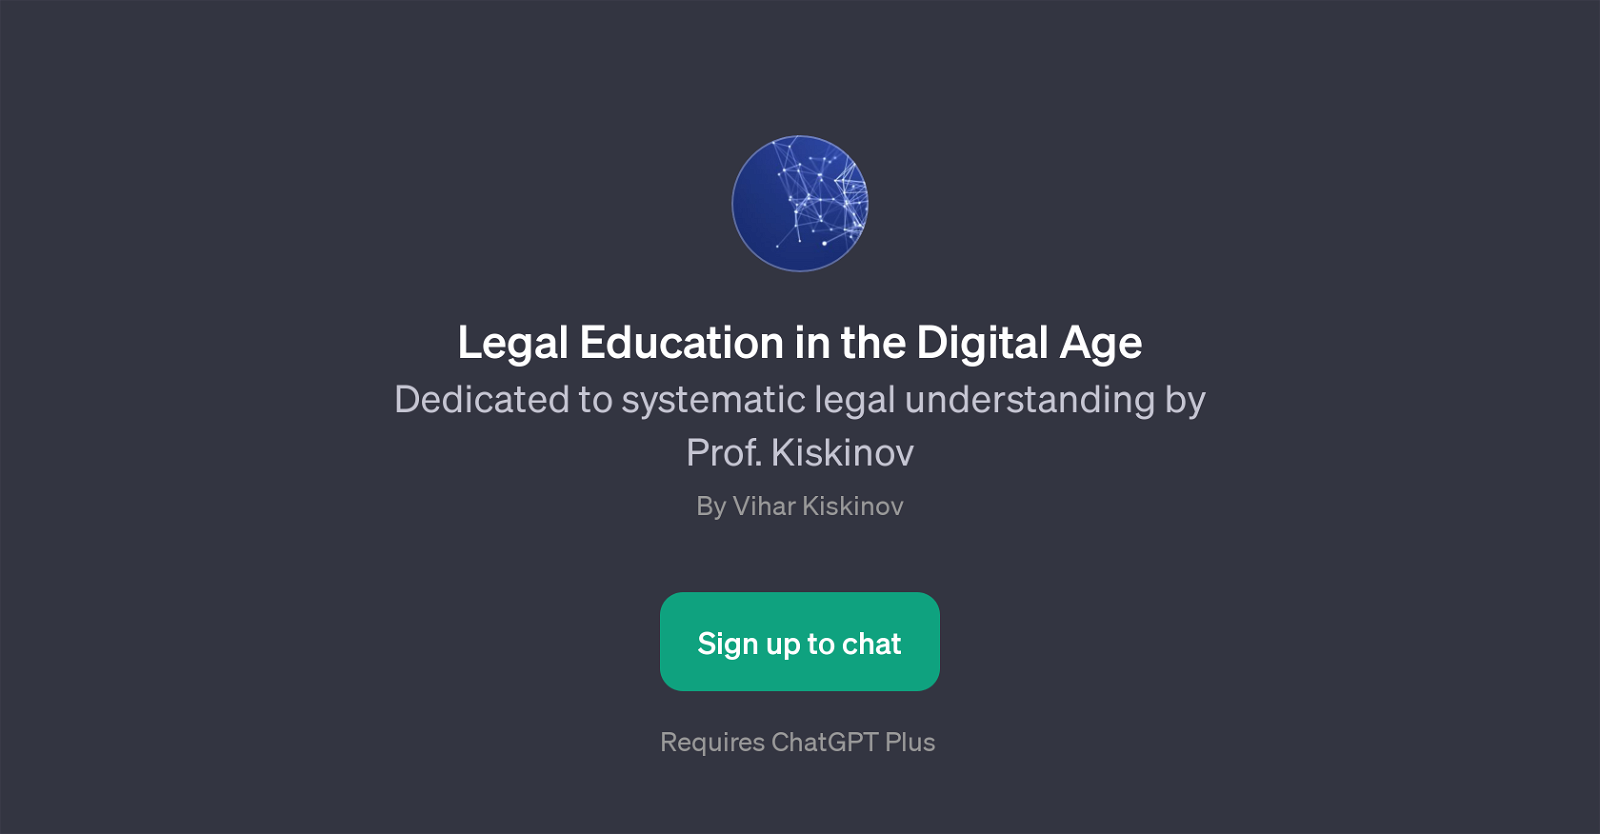 Legal Education in the Digital Age website